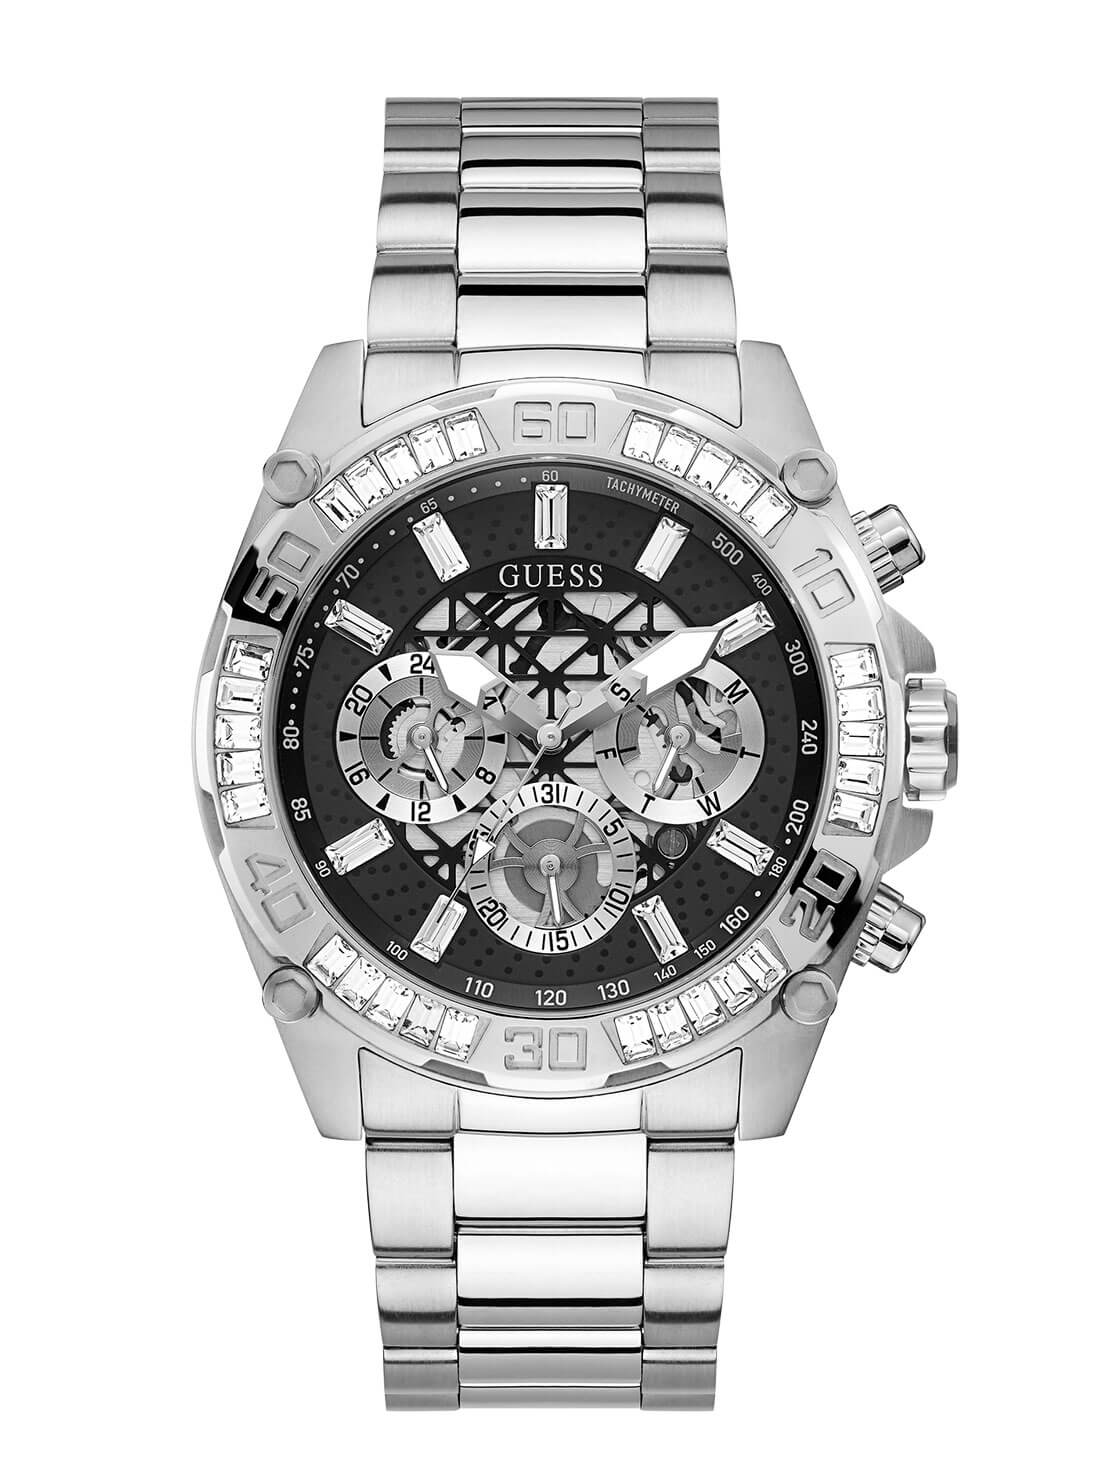    GUESS Mens Silver Trophy Watch GW0390G1 Front View